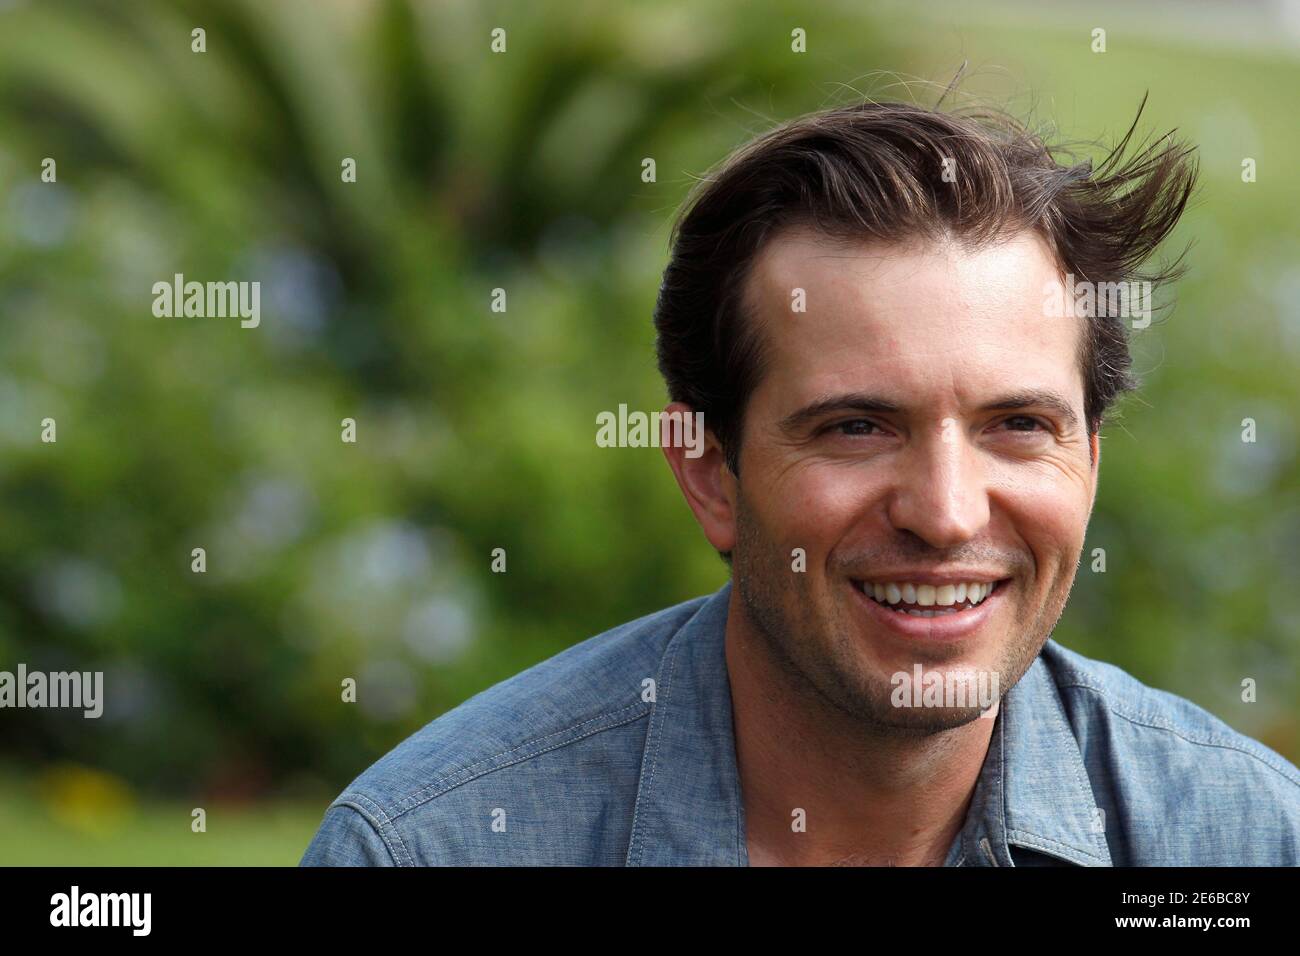 Tygh Runyan, actor of in-competition film 'Road to Nowhere' by Monte Hellman, smiles as he is interviewed during the 67th Venice International Film Festival September 10, 2010.      REUTERS/Alessandro Bianchi   (ITALY - Tags: ENTERTAINMENT) Stock Photo